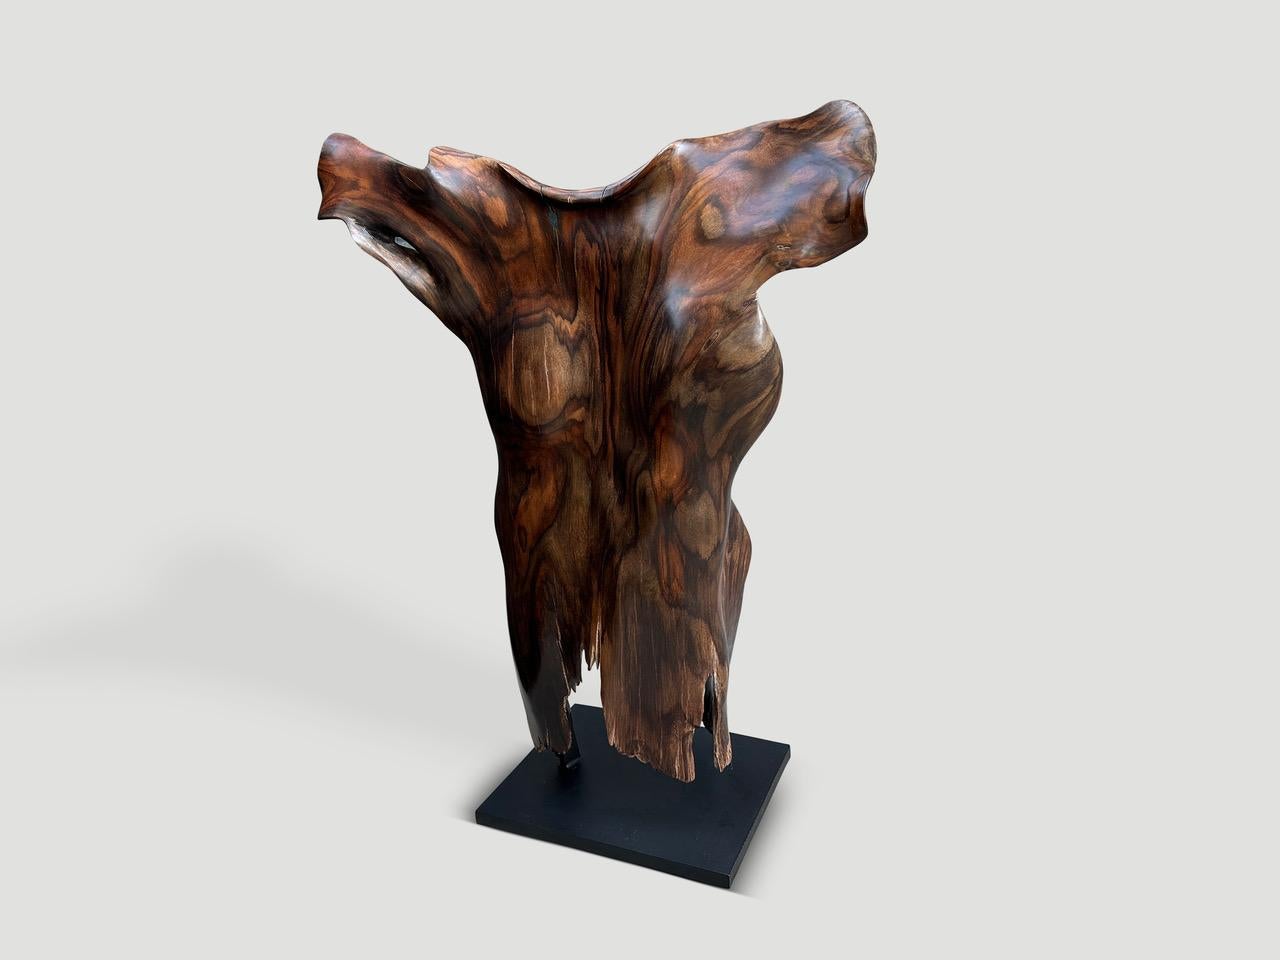 Impressive century year old wood with incredible patina and character is set on a minimalist black steel base. This beautiful single piece of wood has been hand carved whilst respecting the natural organic shape. It’s all in the details. Full